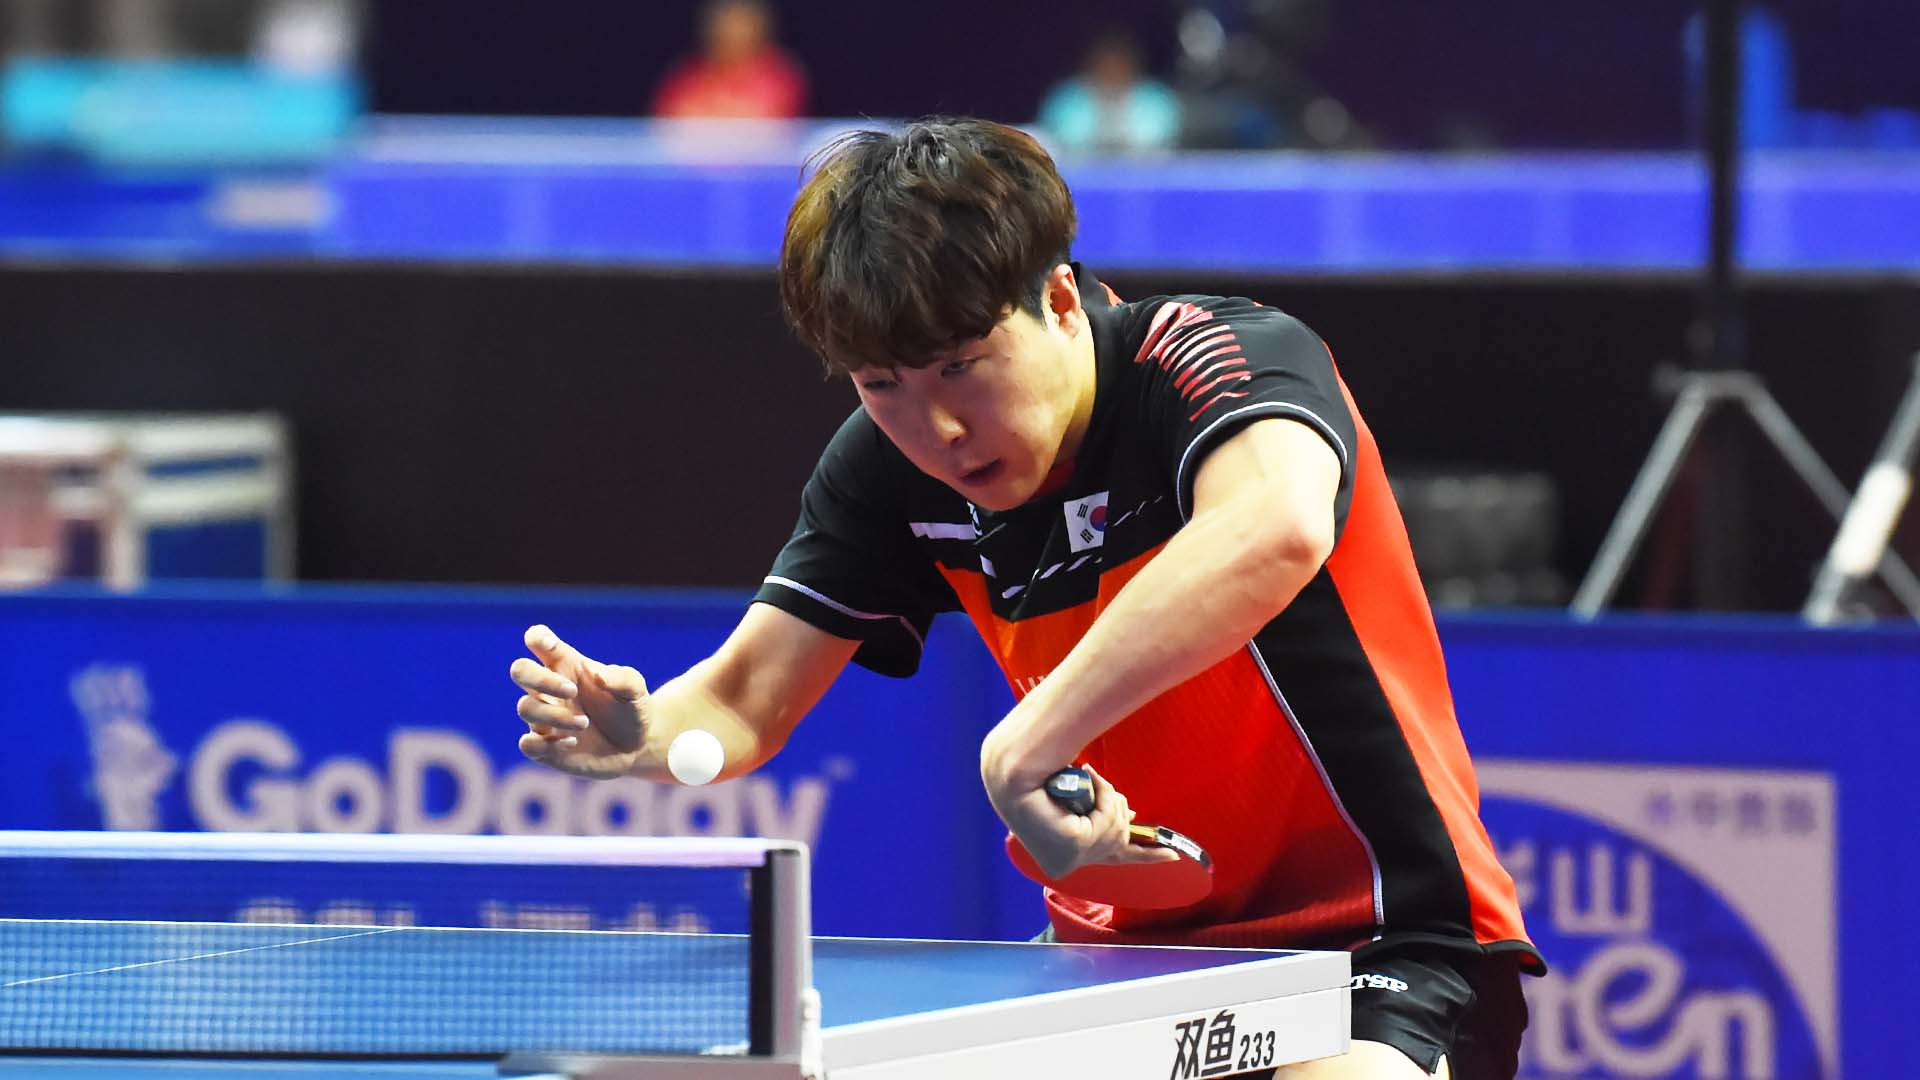 Lim stuns third seed and 2012 winner Xu to reach second round at ITTF China Open